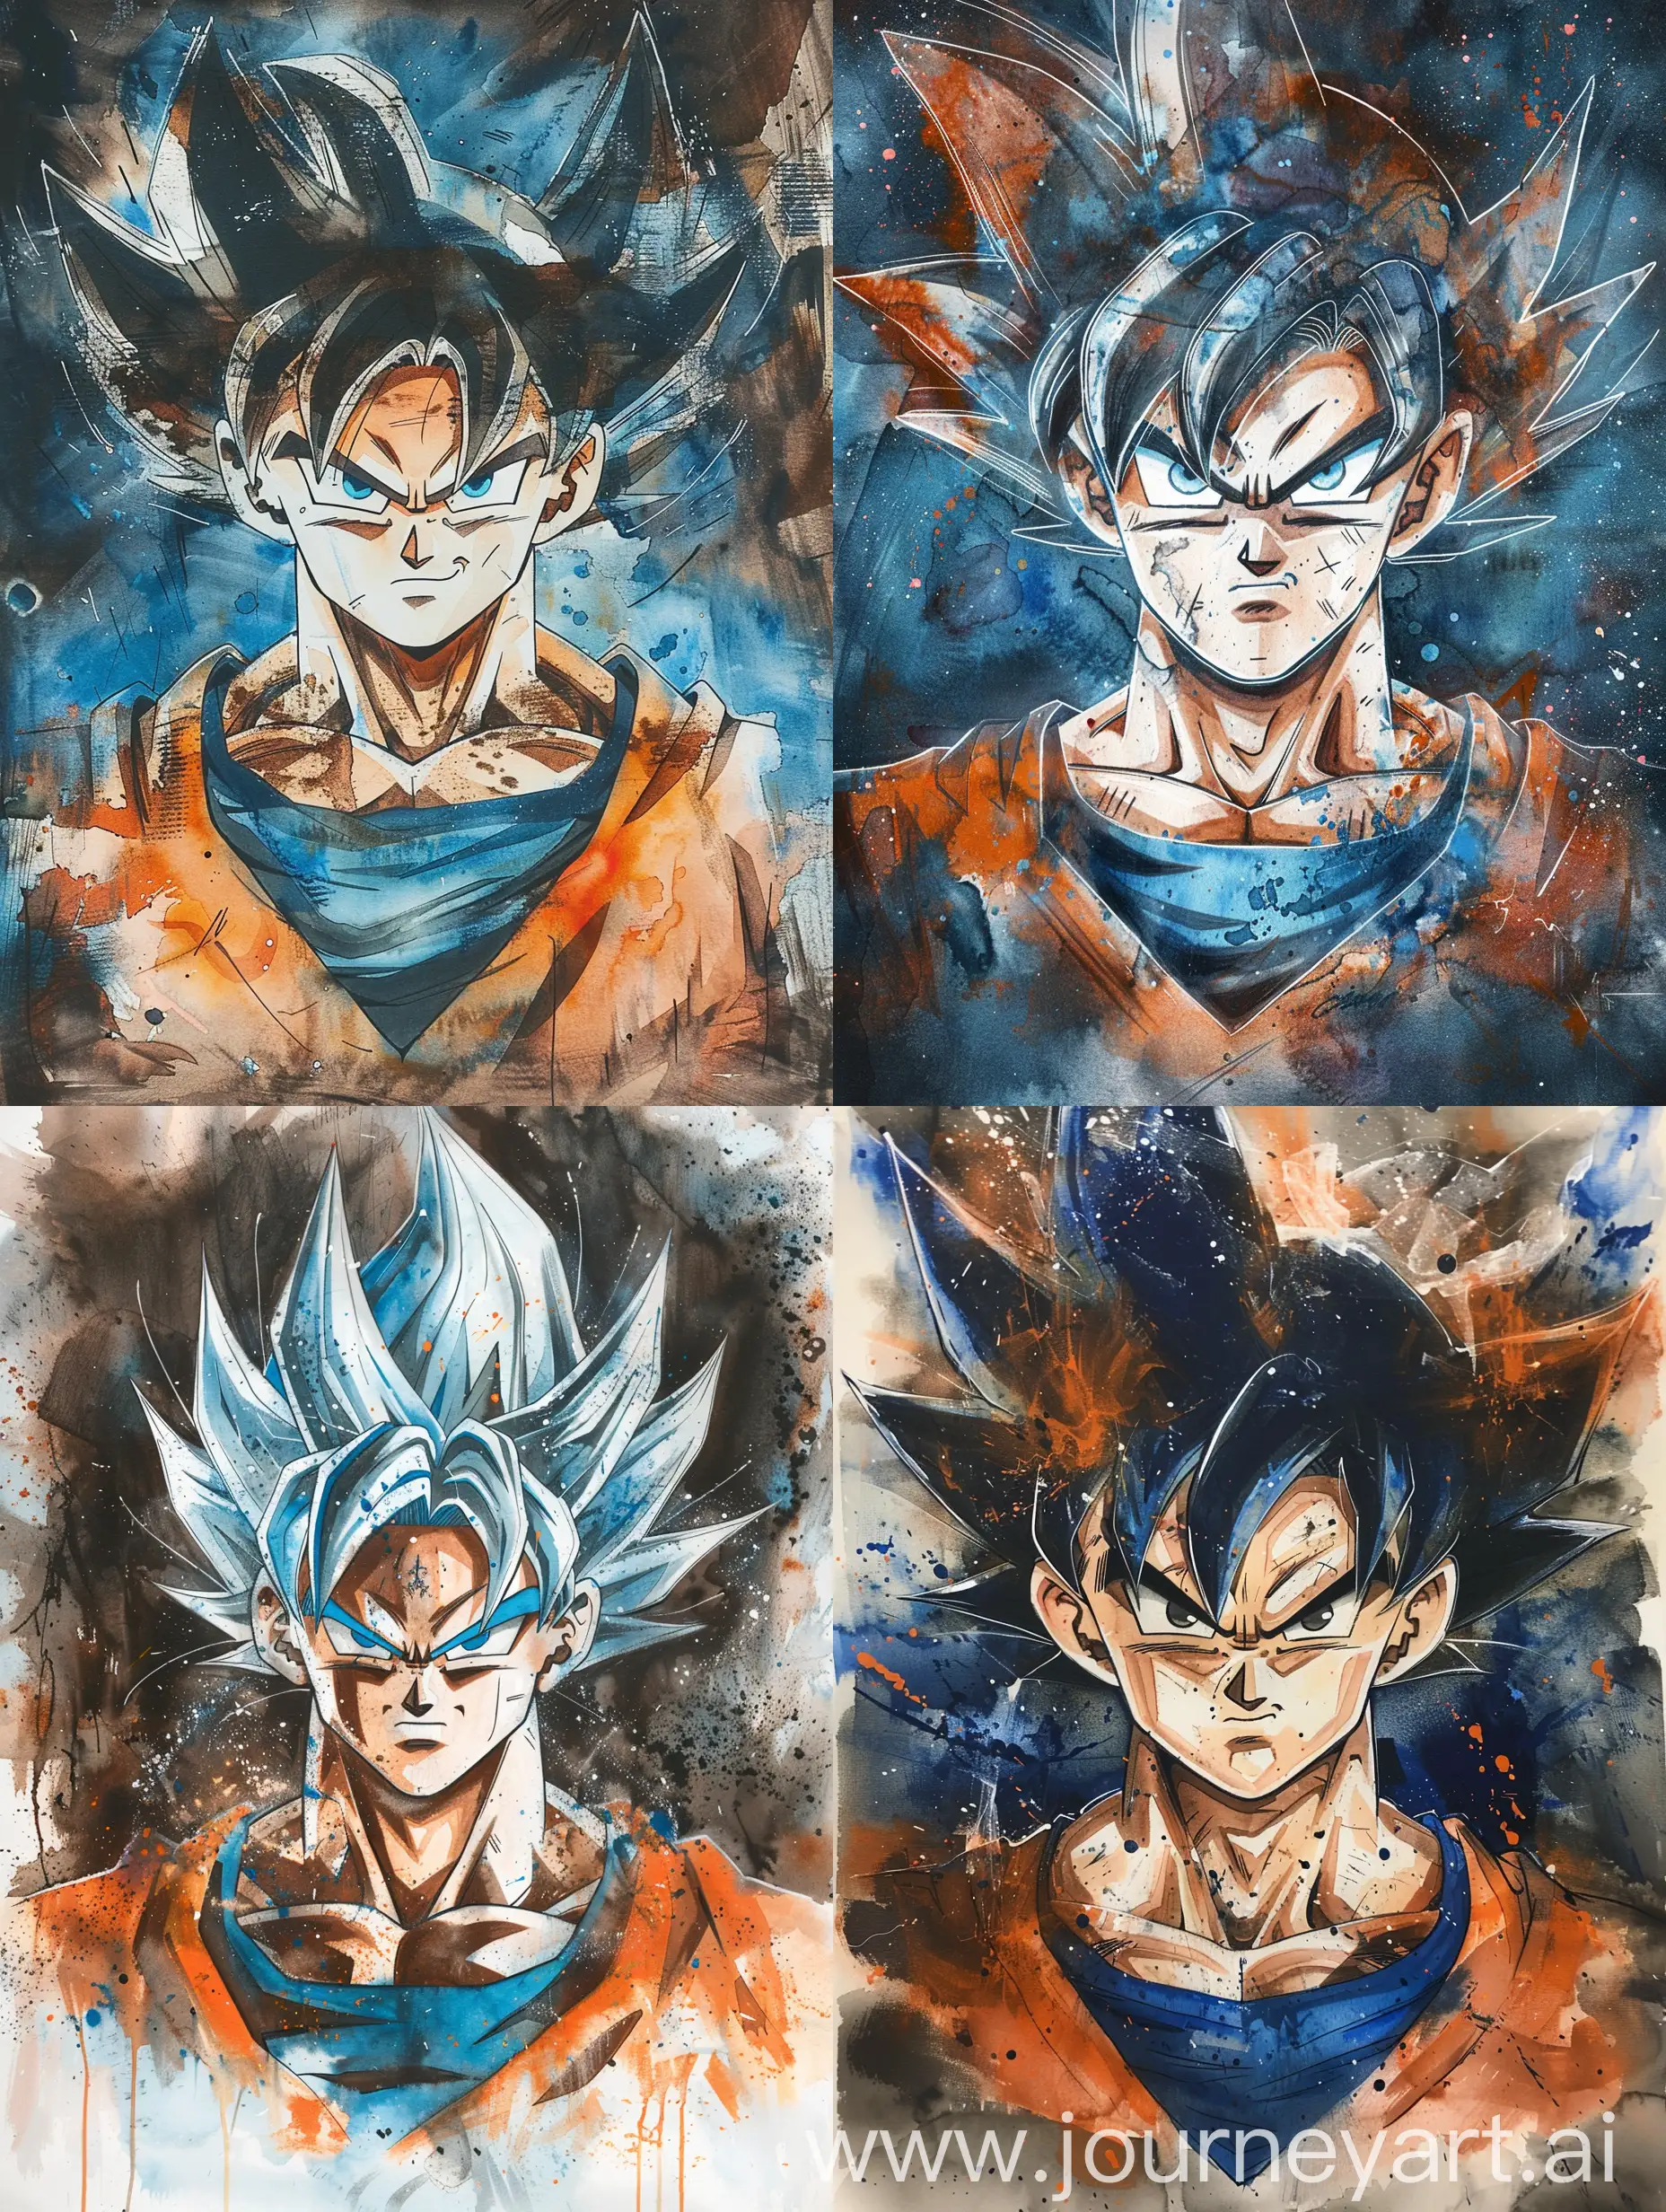 A captivating work of conceptual art featuring a striking watercolor and ink portrait of the iconic Dragon Ball superhero, Goku. His strong and agile form is rendered beautifully, with a rich Orange and blue color palette dominating the artwork, while the dark and mystical backdrop of the dimensional world accentuates his piercing gaze and sculpted features. His eyes, rendered in glossy whites and blues, radiate real intensity and determination. This extraordinary work of conceptual art, painting, and illustration masterfully captures the essence of Goku, evoking feelings of strength, alertness, and heroism., painting, conceptual art, illustration